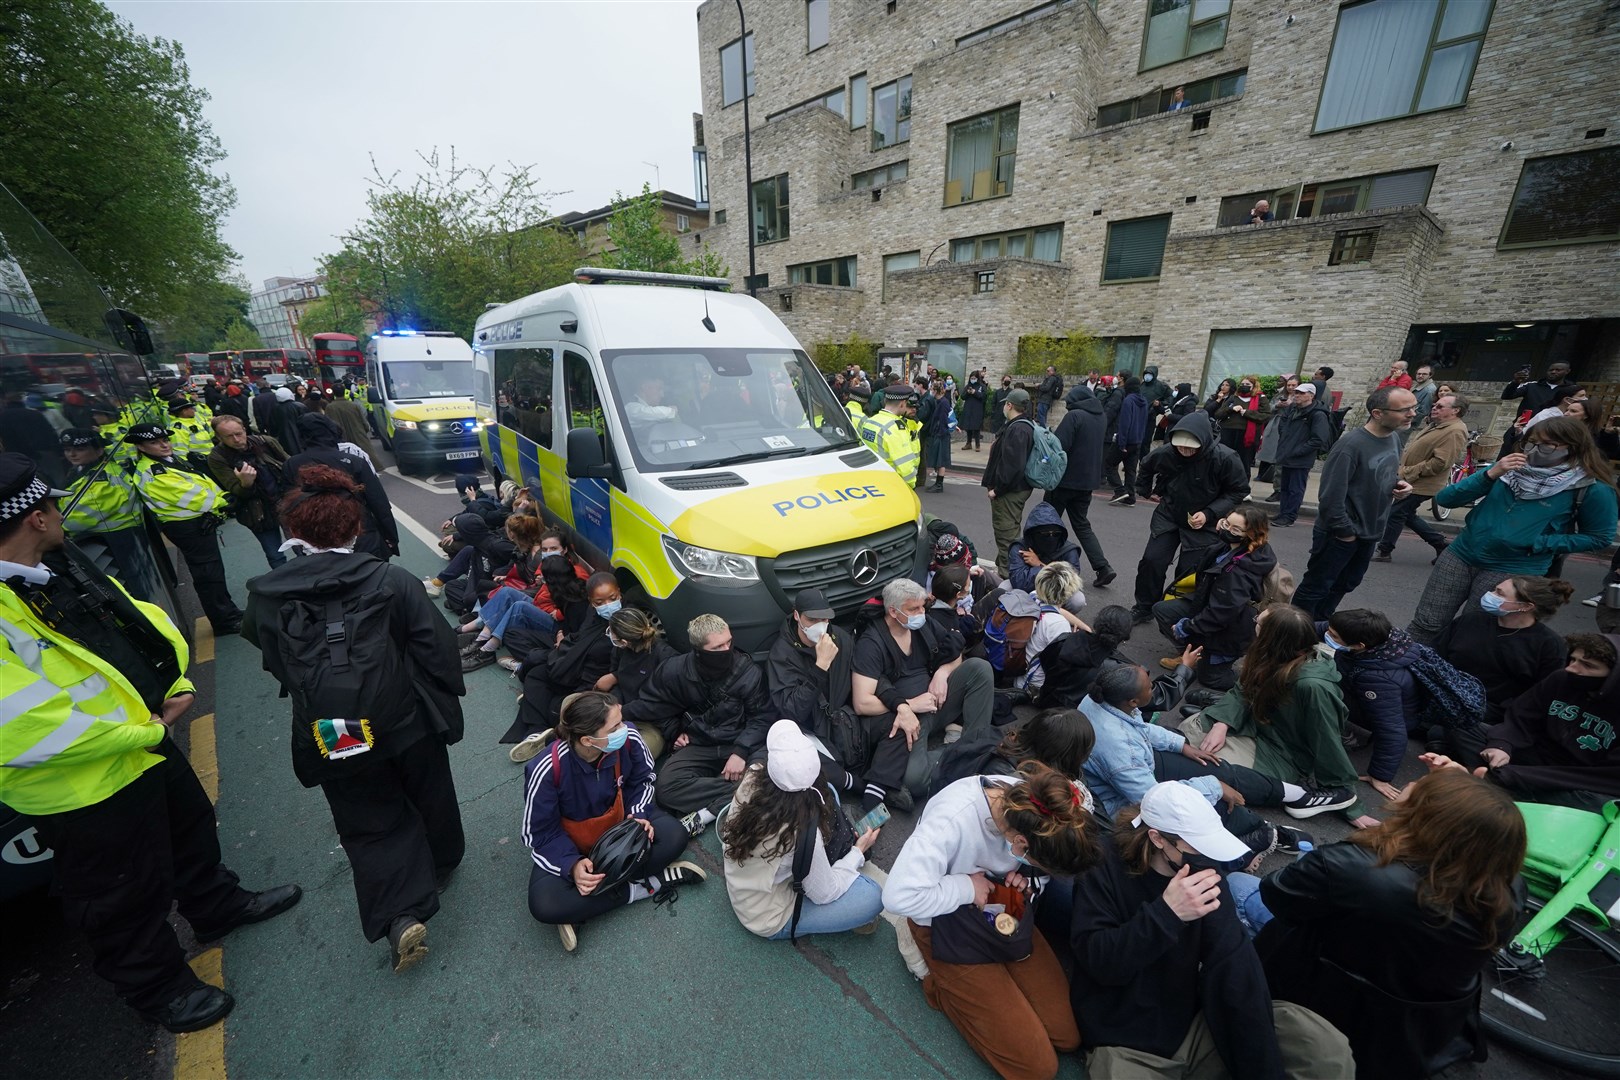 Protesters sat in front of a police van after forming a blockade around the coach (Yui Mok/PA)